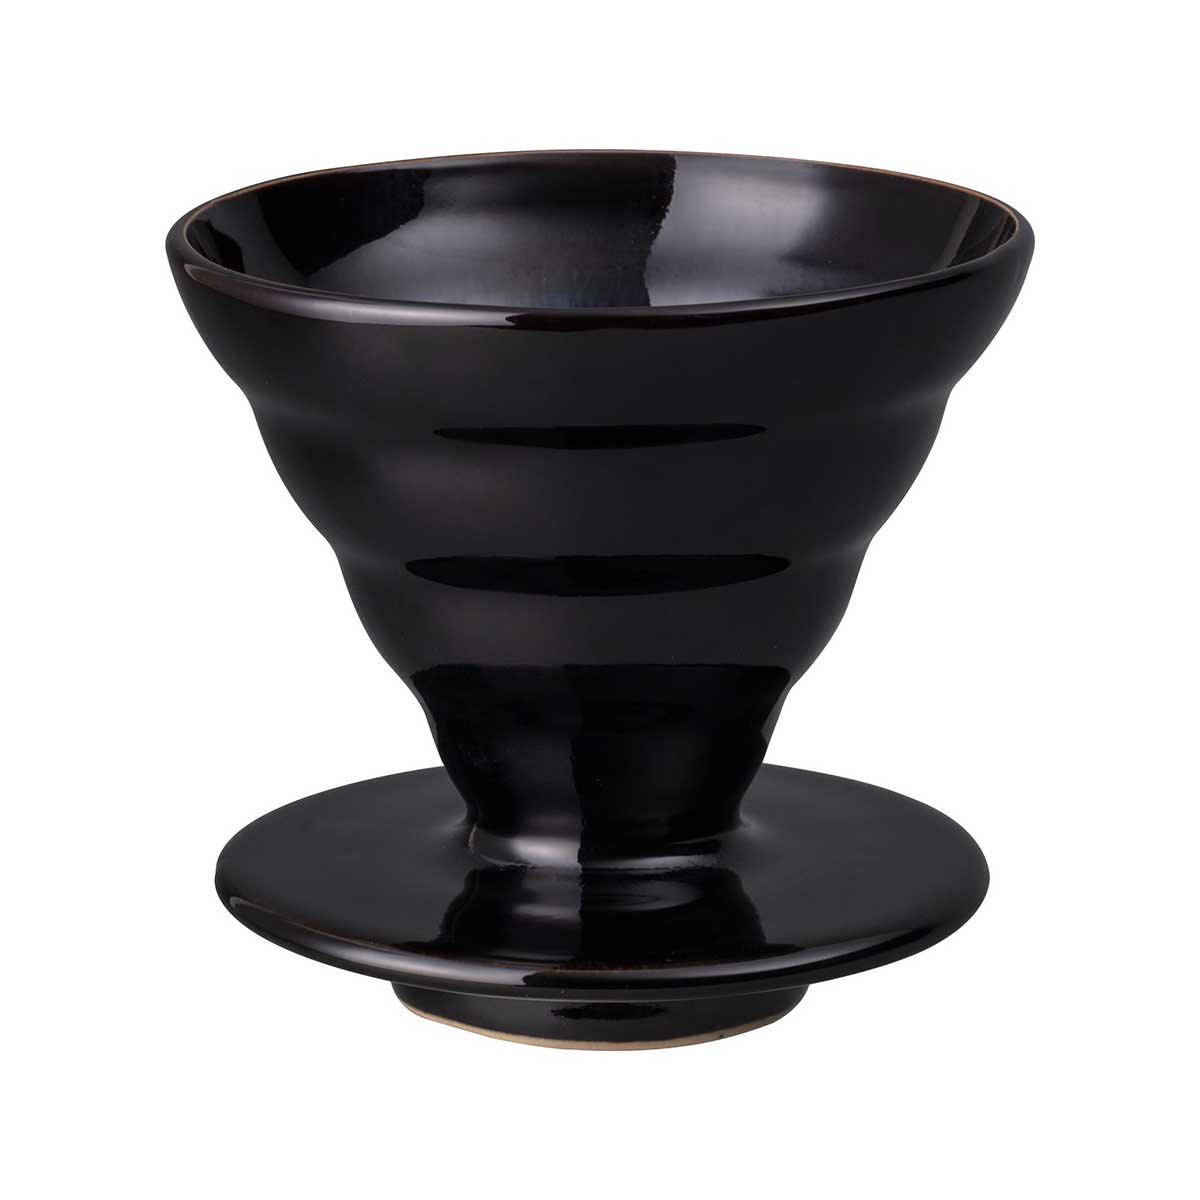 Denby Halo Brew Pour Over Coffee Dripper